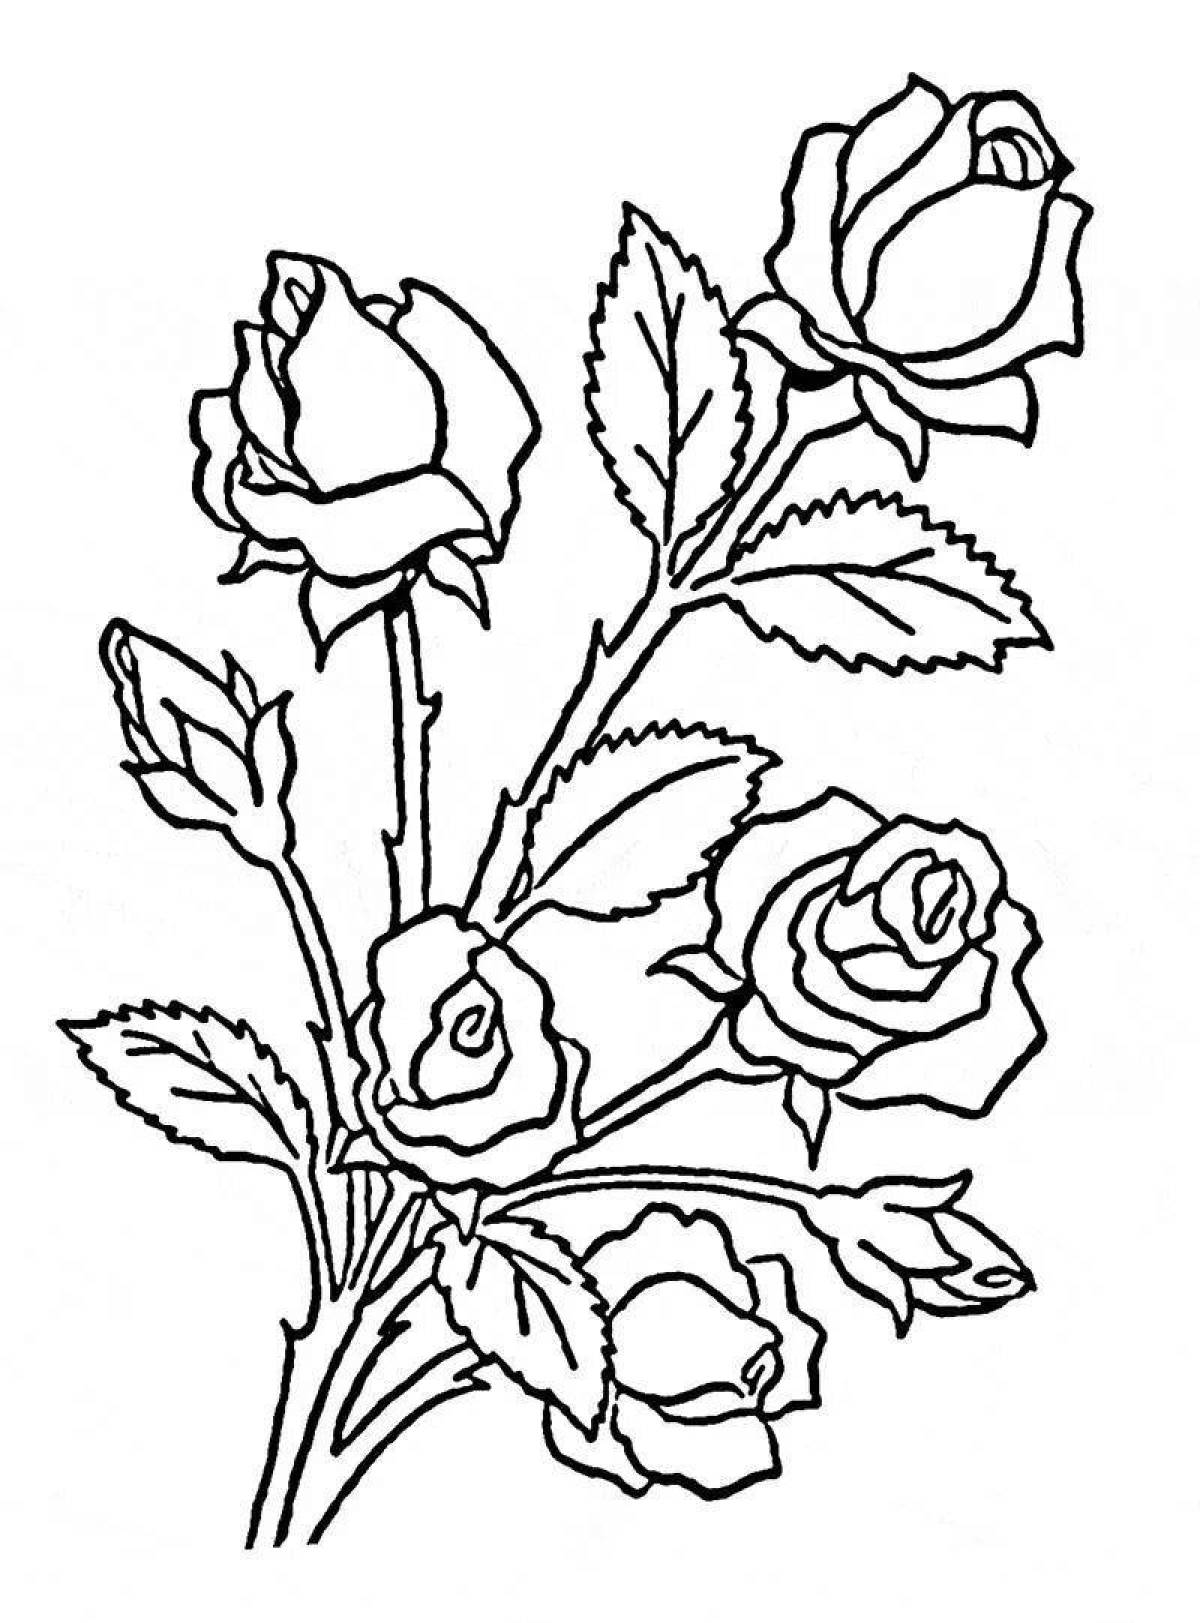 Perfect coloring drawing of a rose